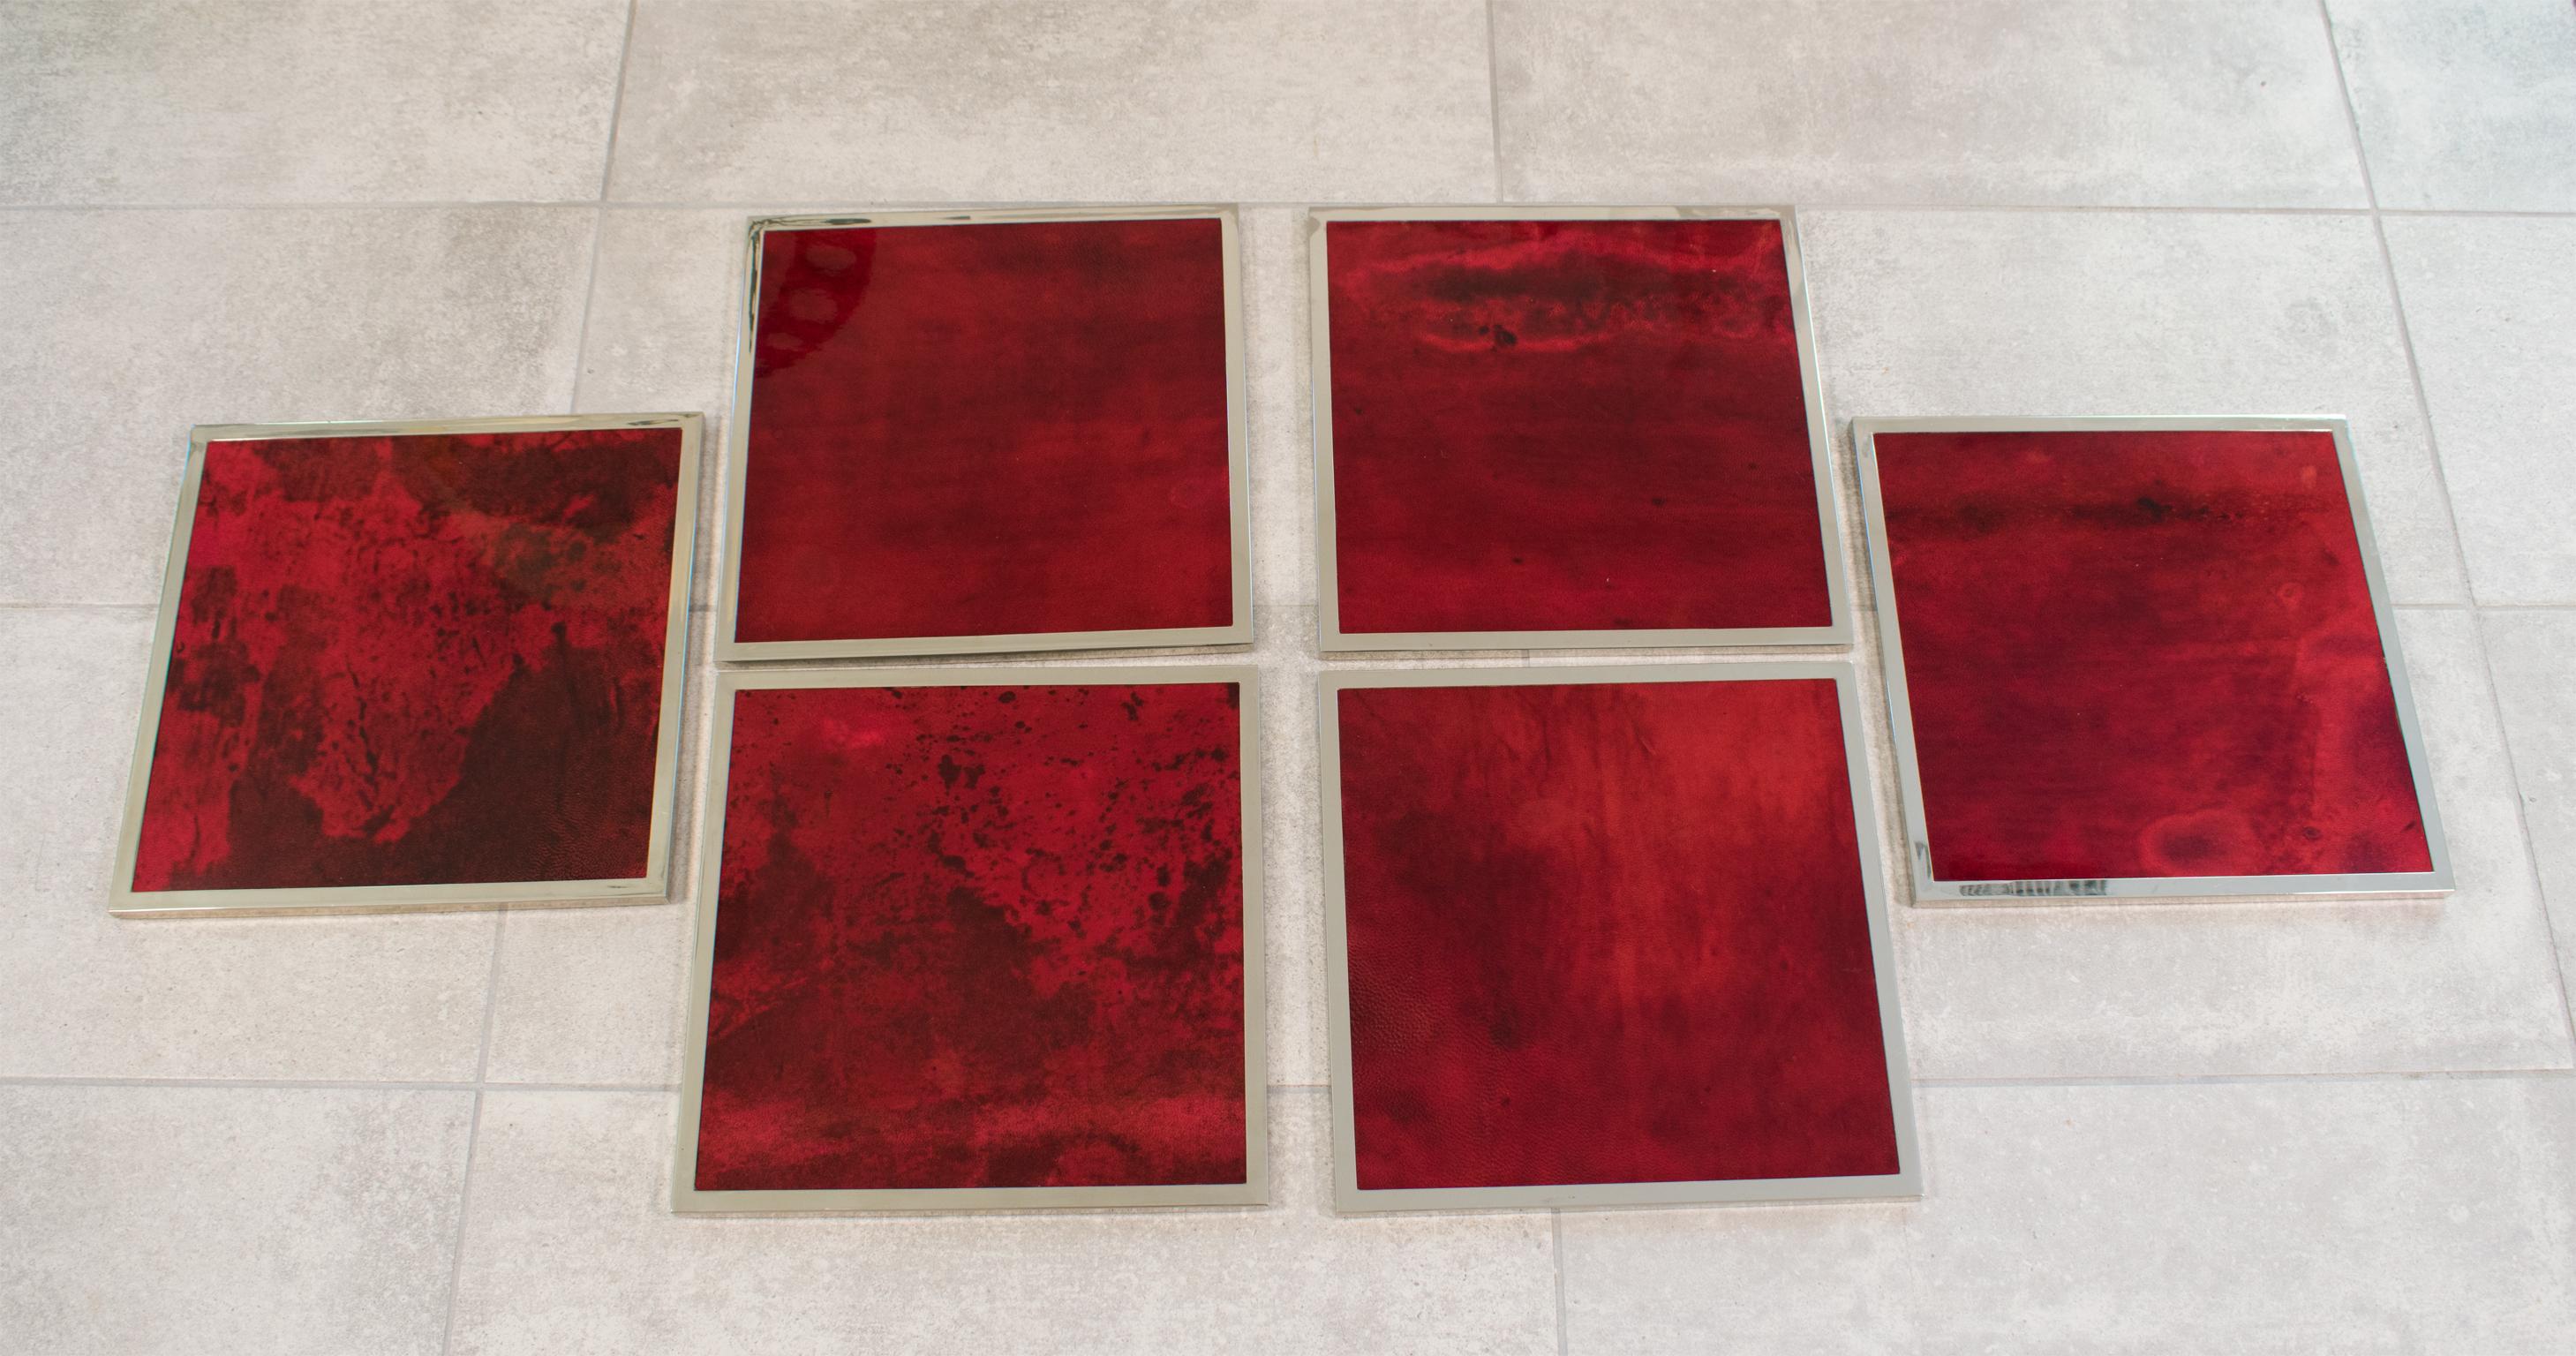 Italian designer Aldo Tura, Milano, designed this lacquered goatskin and chromed metal placemat or plate charger set in the 1970s. The pieces boast a beautiful square wooden base design covered with high gloss oxblood-colored goatskin parchment